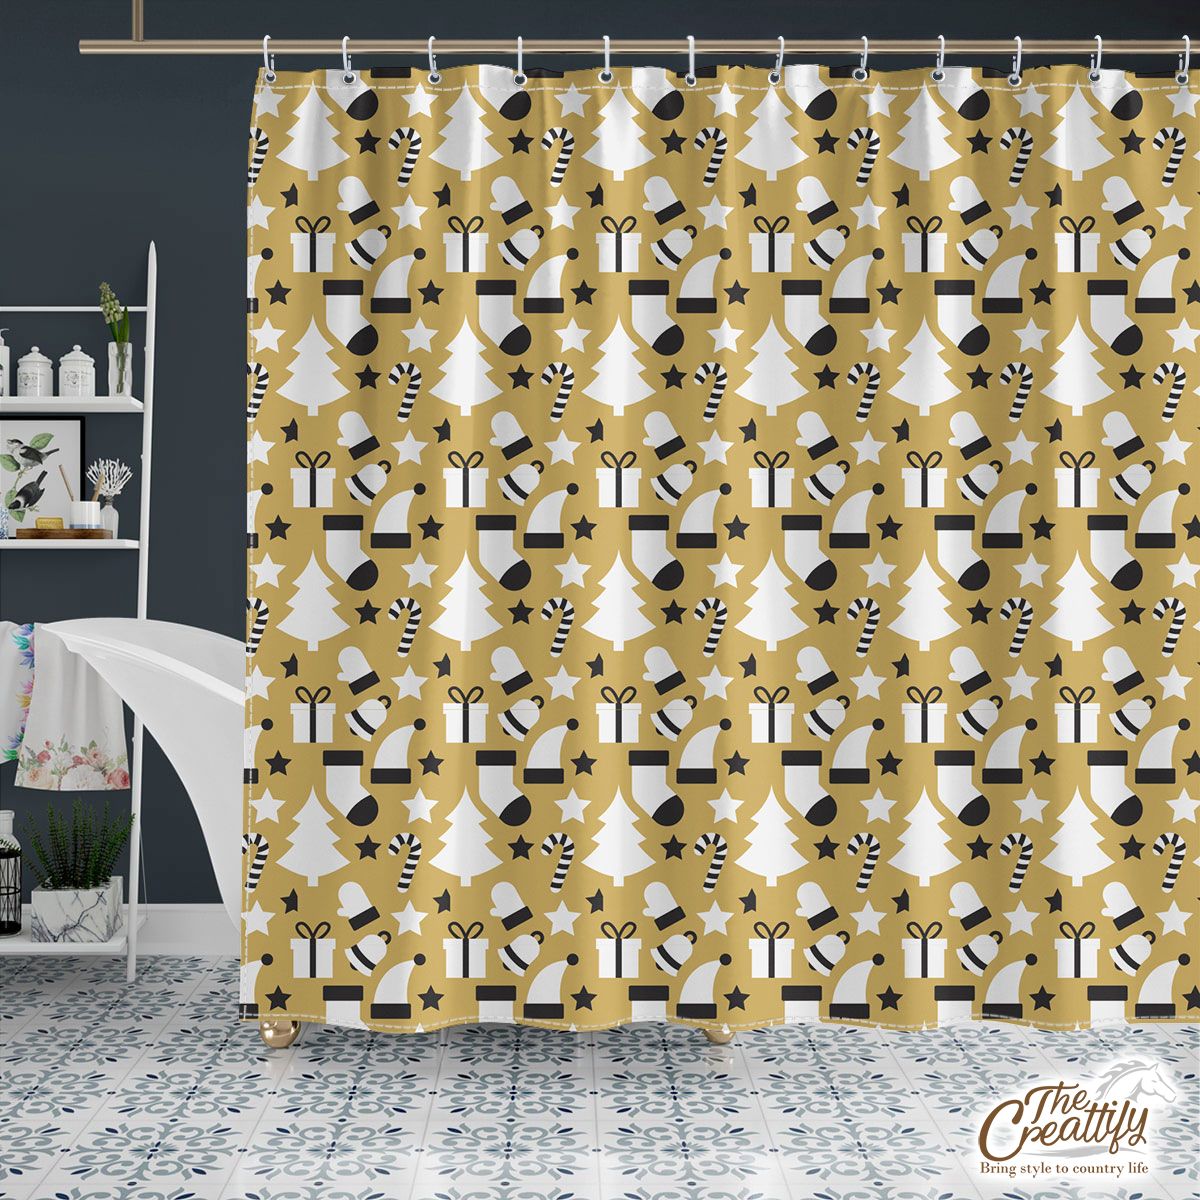 Black And White Christmas Socks, Christmas Tree, Candy Cane On Gold Background Shower Curtain